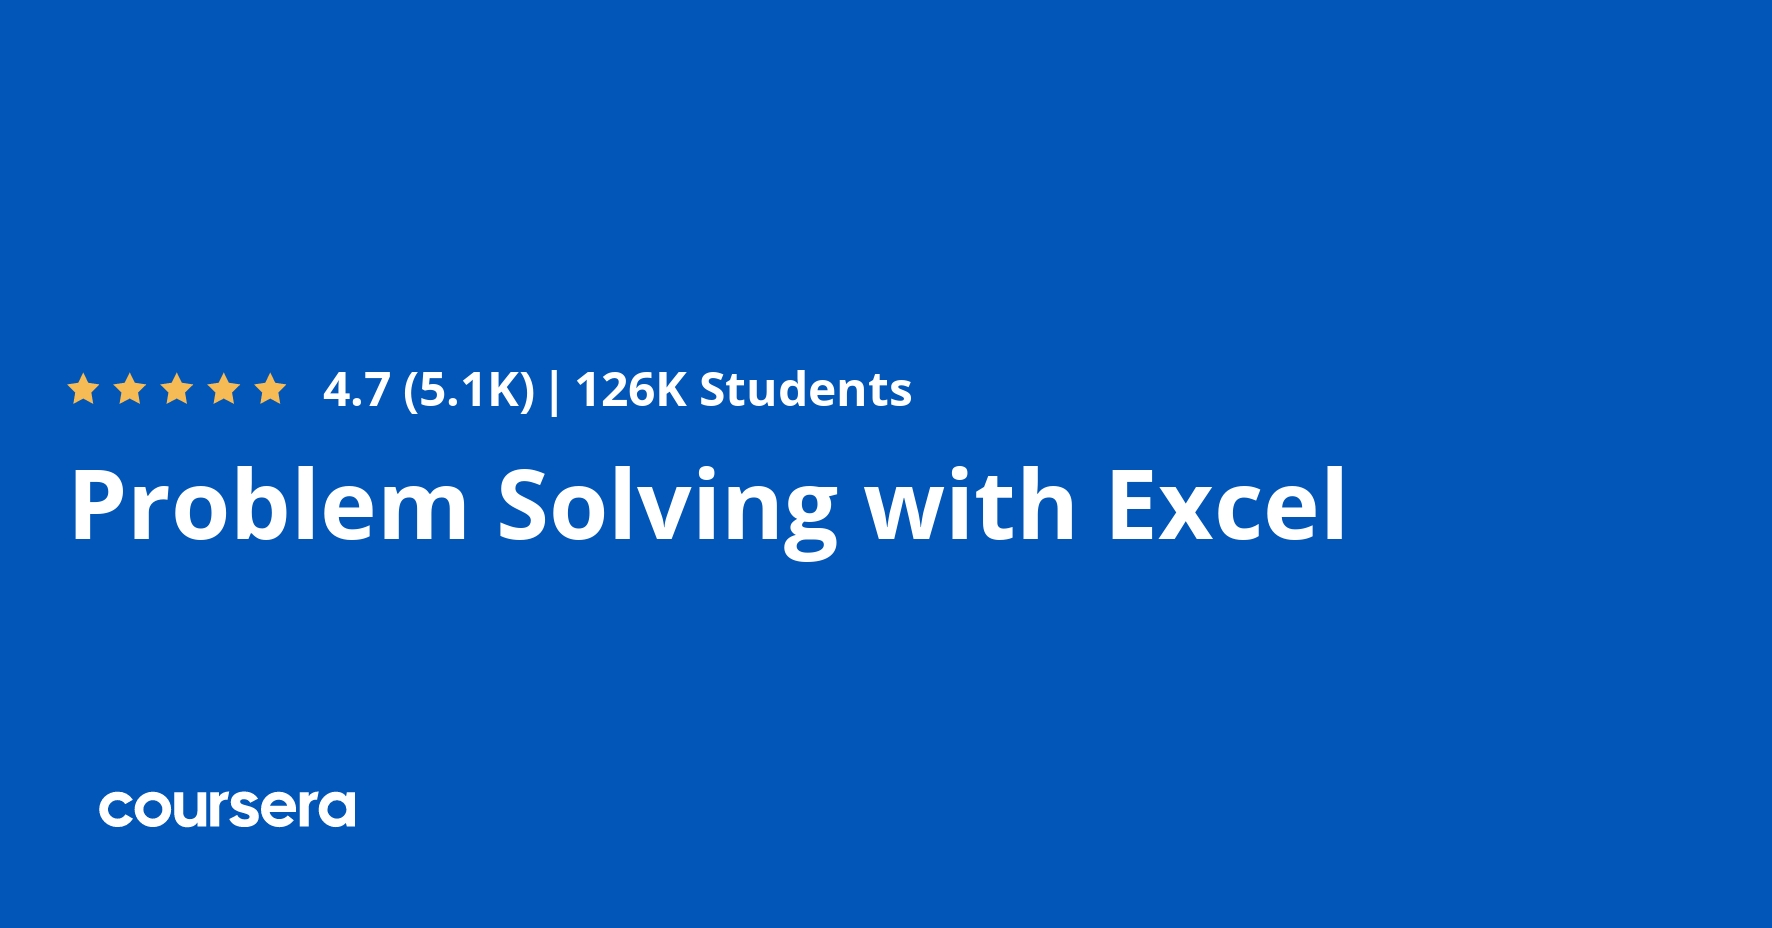 problem solving with excel coursera answers